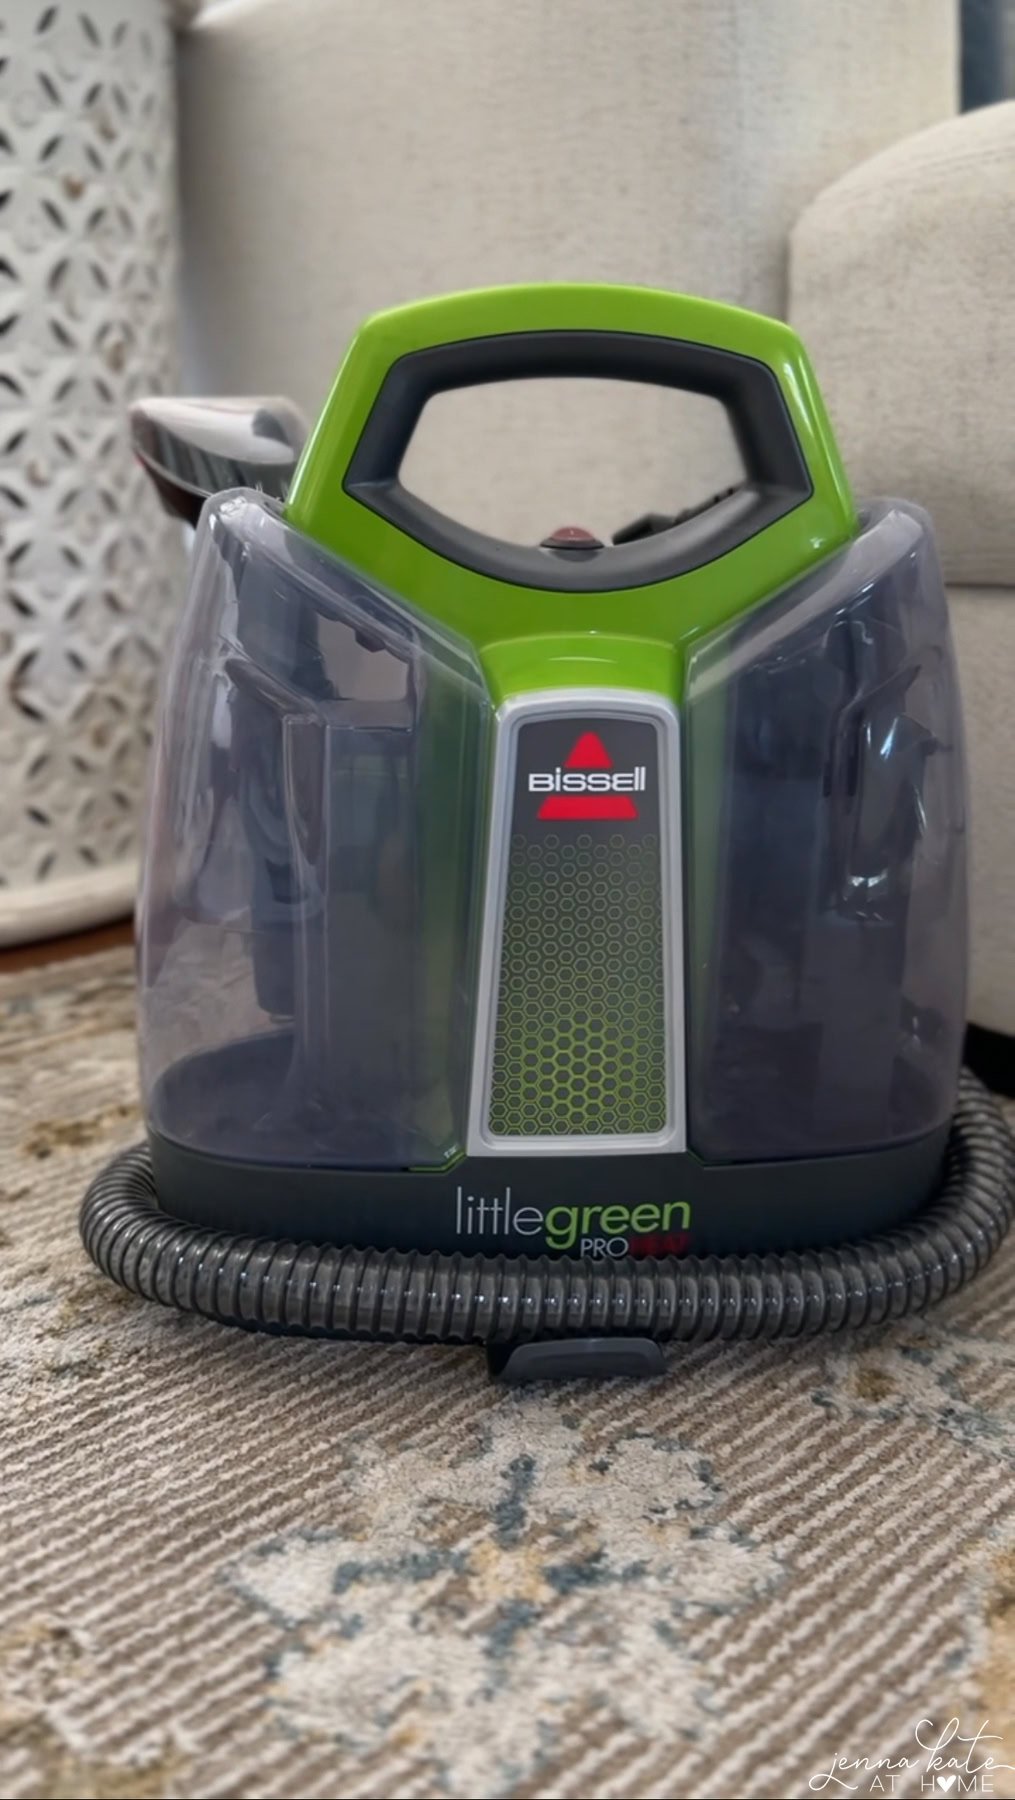 Bissell Little Green upholstery cleaner.